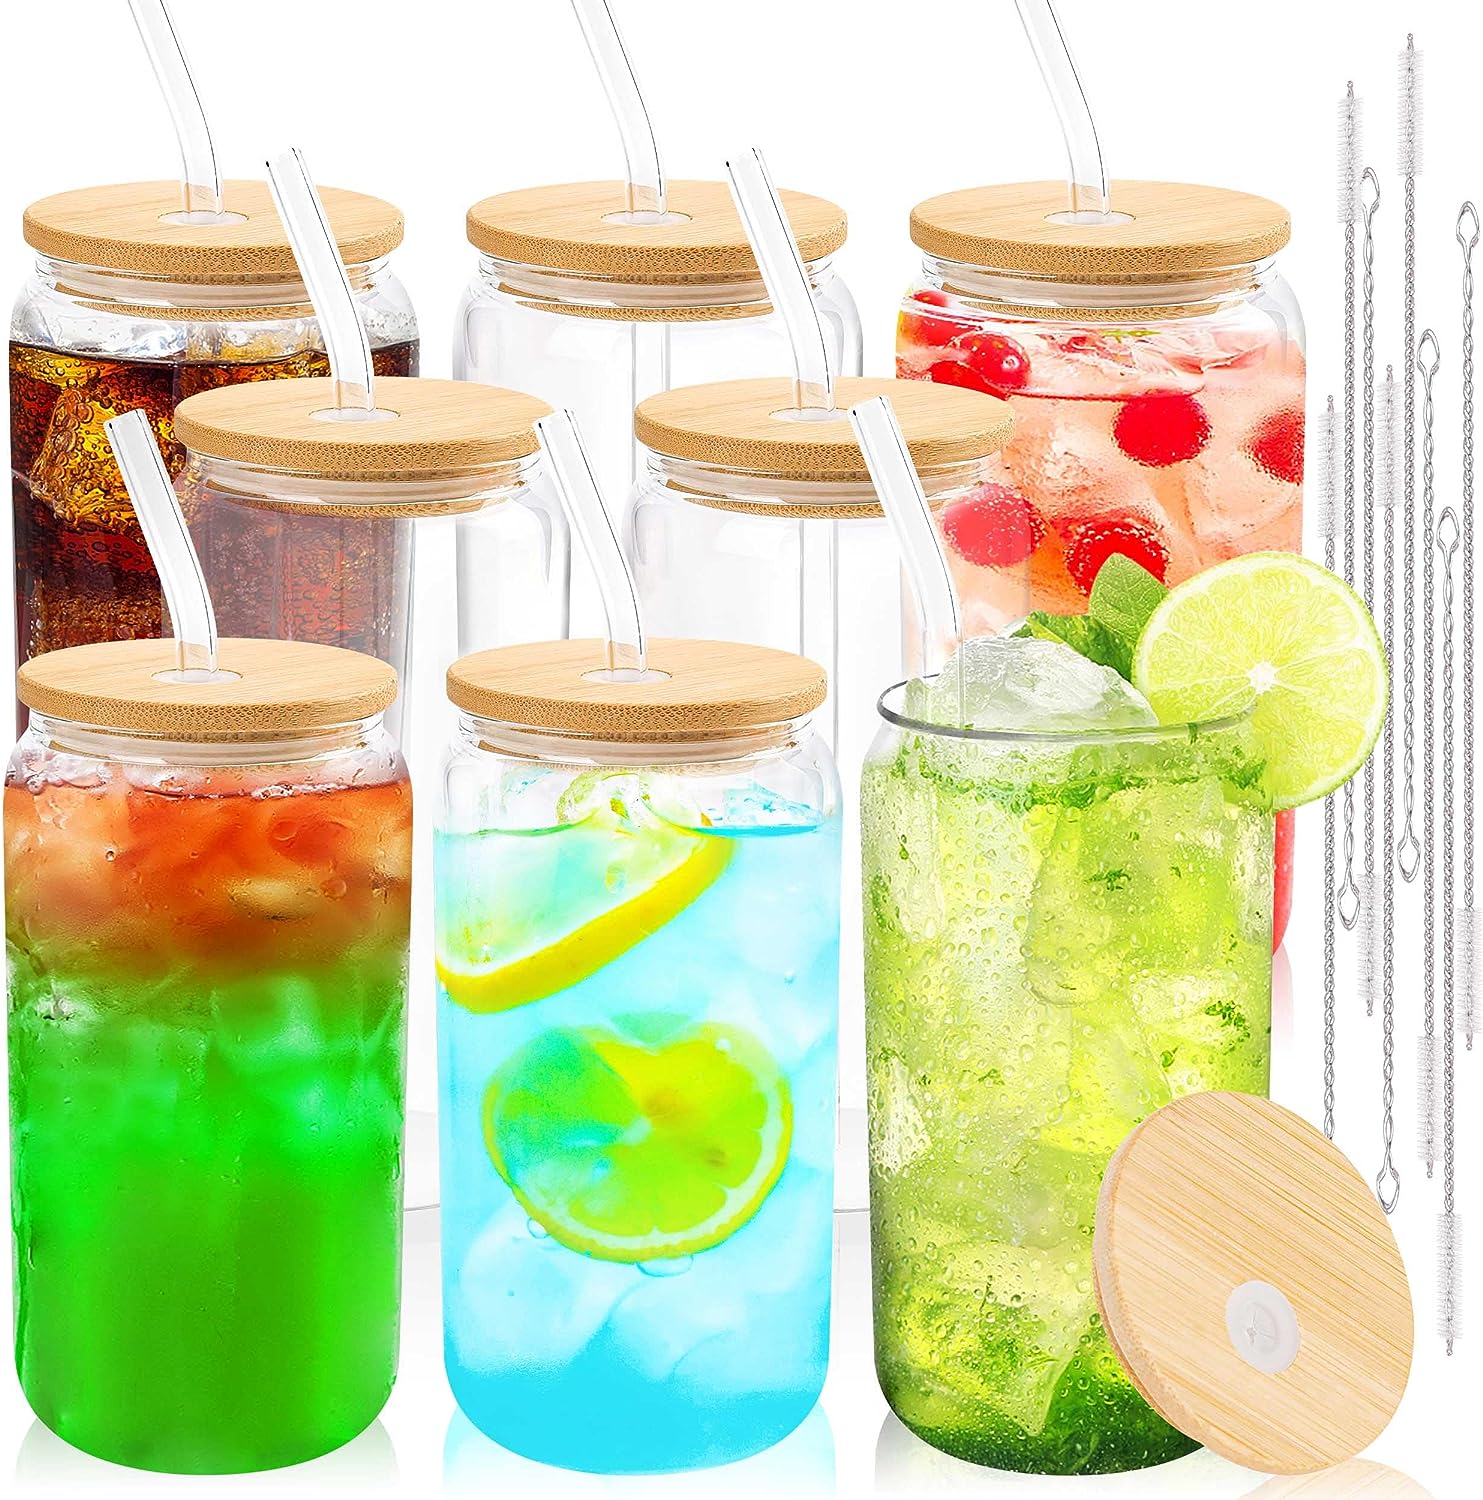 16 oz Beer Glasses Lids with Straw Hole Drinking Glass Cups Anticorrosion  Beer Can Cups Lids Bamboo Lids with Brush for 16 oz Canned Beer Glasses Jar